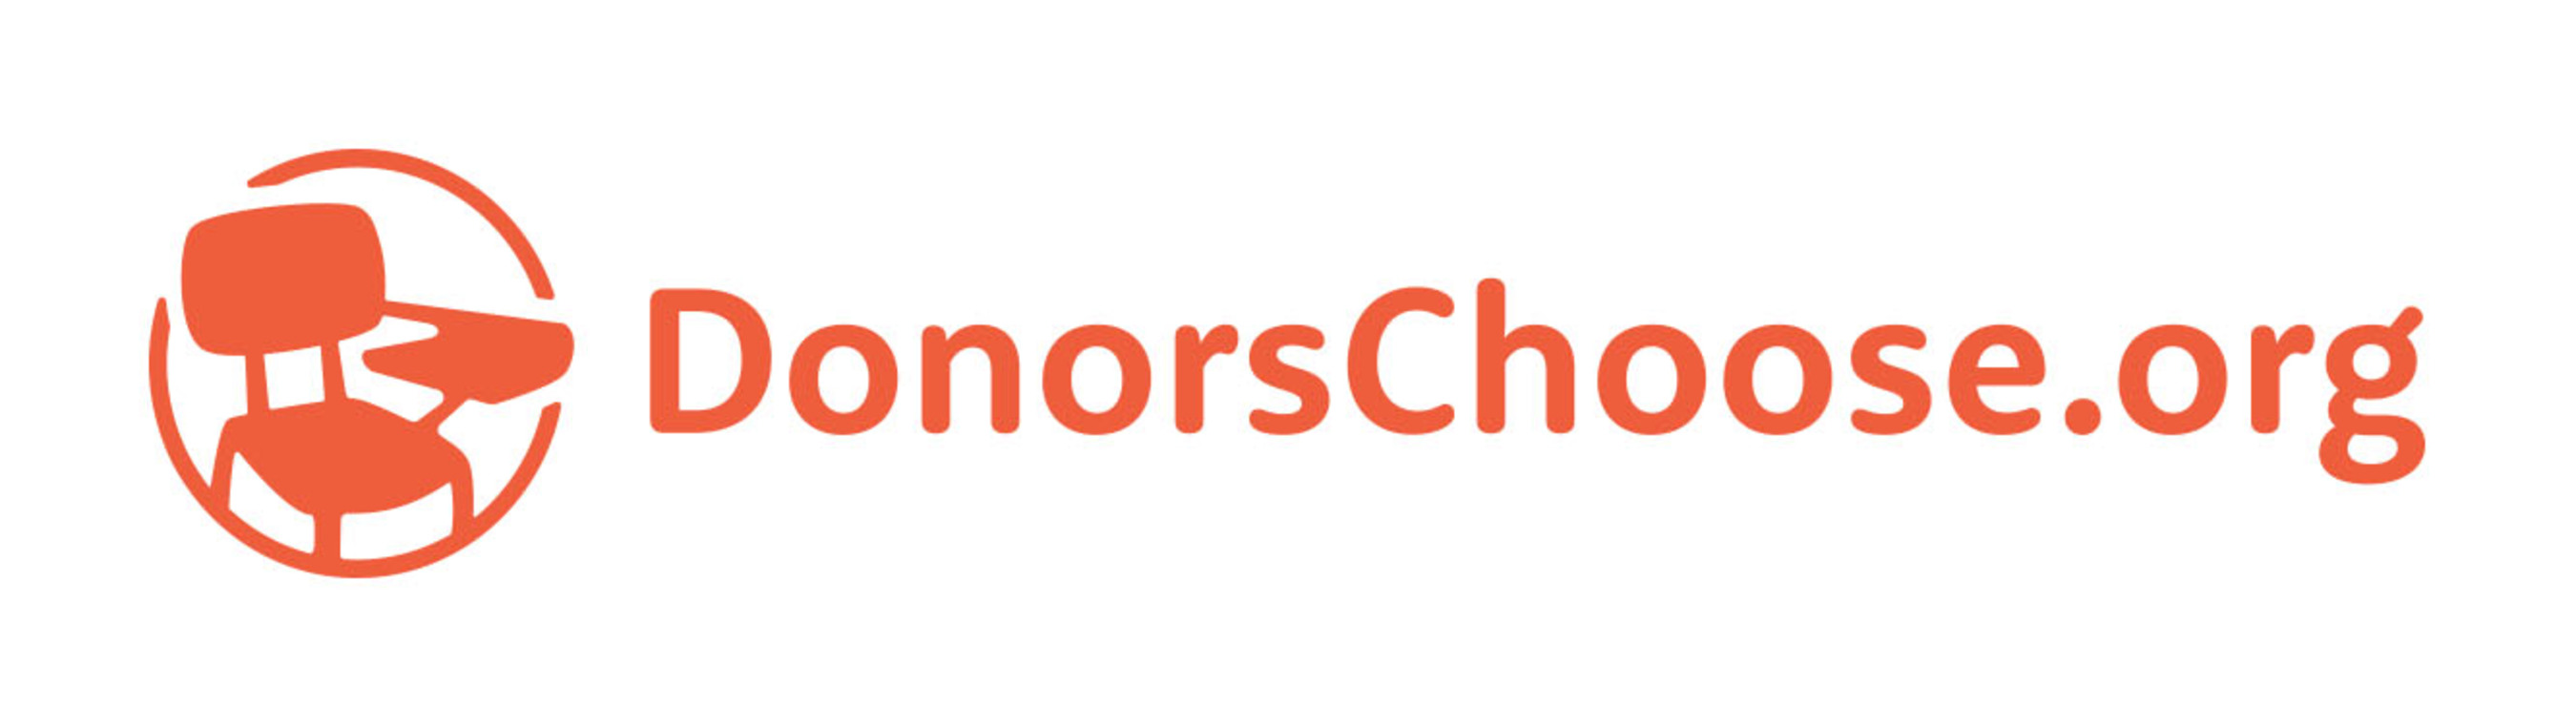 DonorsChoose.org, a crowdfunding non-profit that enables anyone to help a classroom in need, has been named one of Fast Company's "50 Most Innovative Companies in the World.